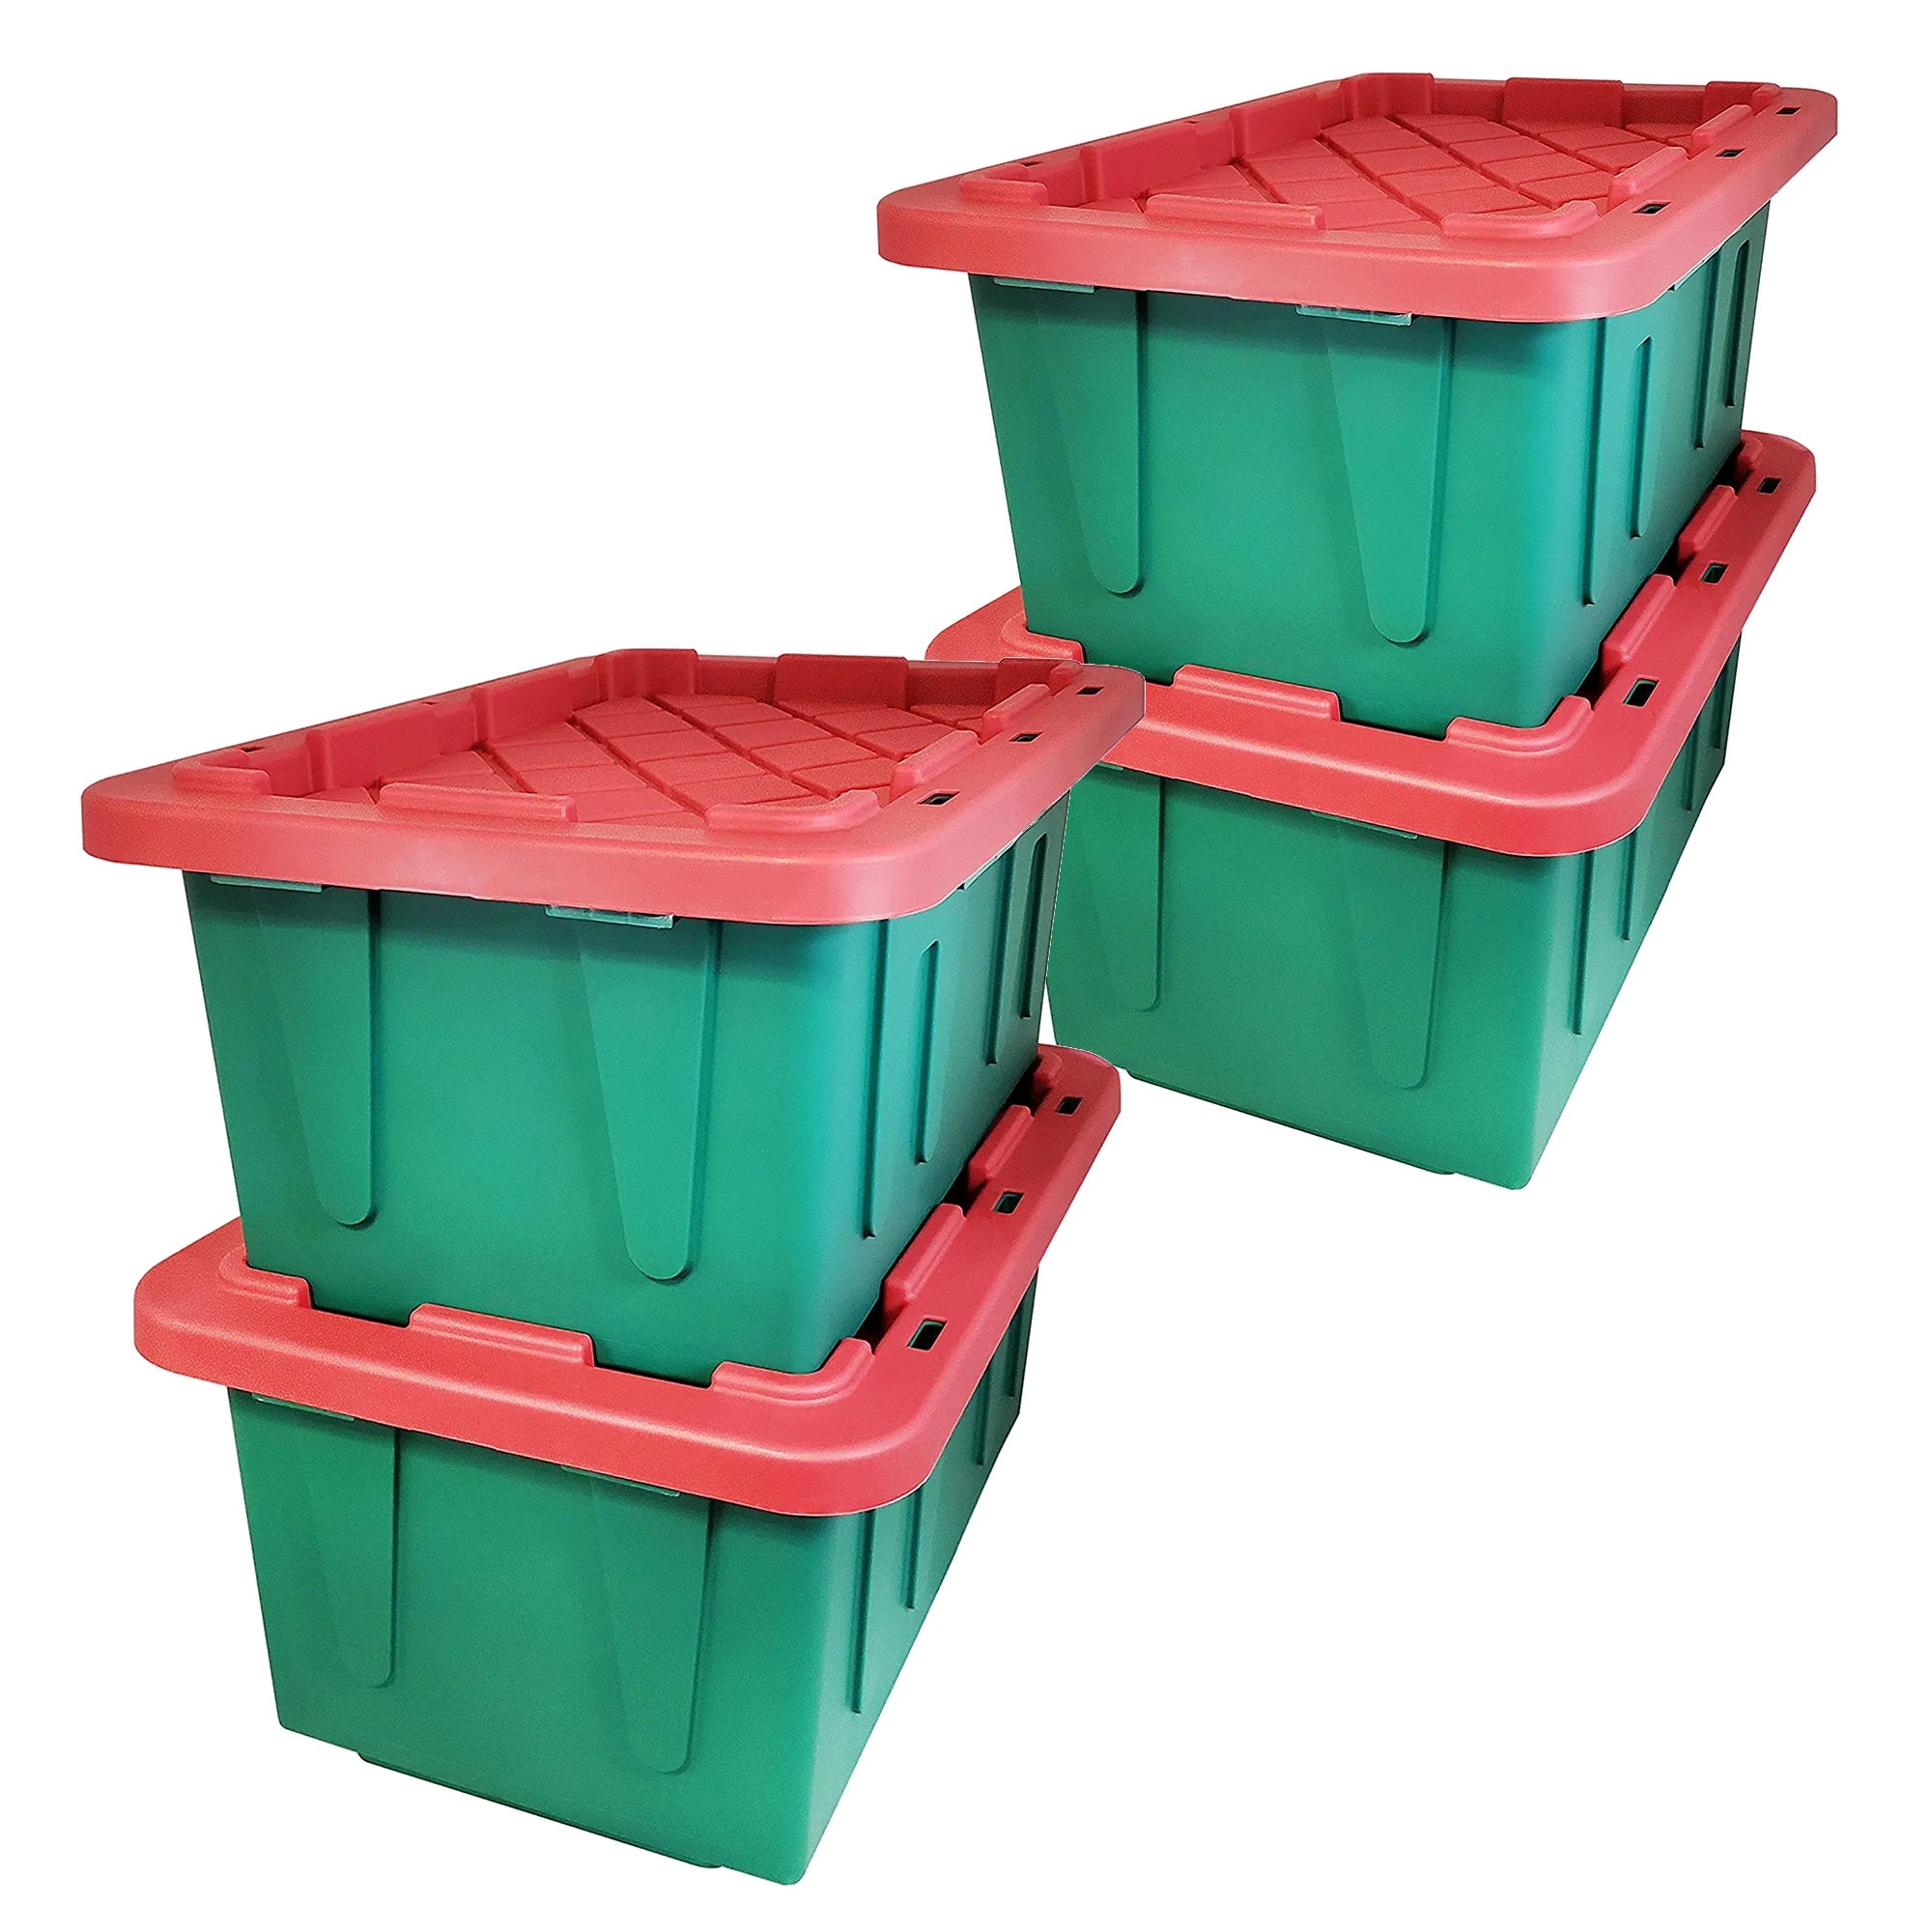 Homz 18 Gallon Heavy Duty Plastic Holiday Storage Totes, Green/Red (4 Pack)